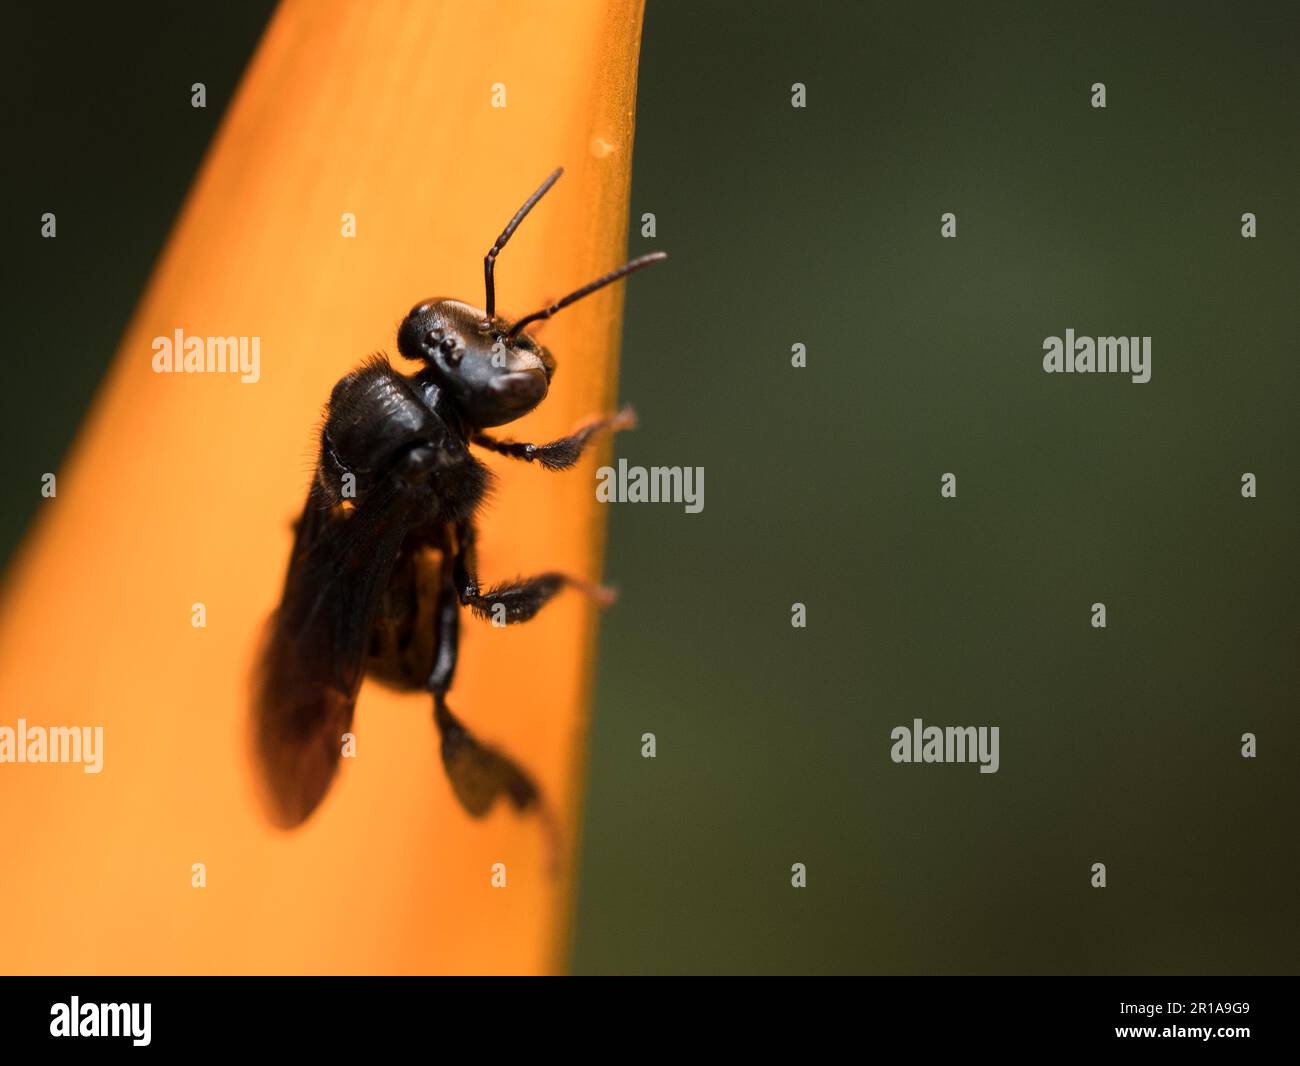 Black orchid bee walking on the orange petal of a tropical flower Stock Photo